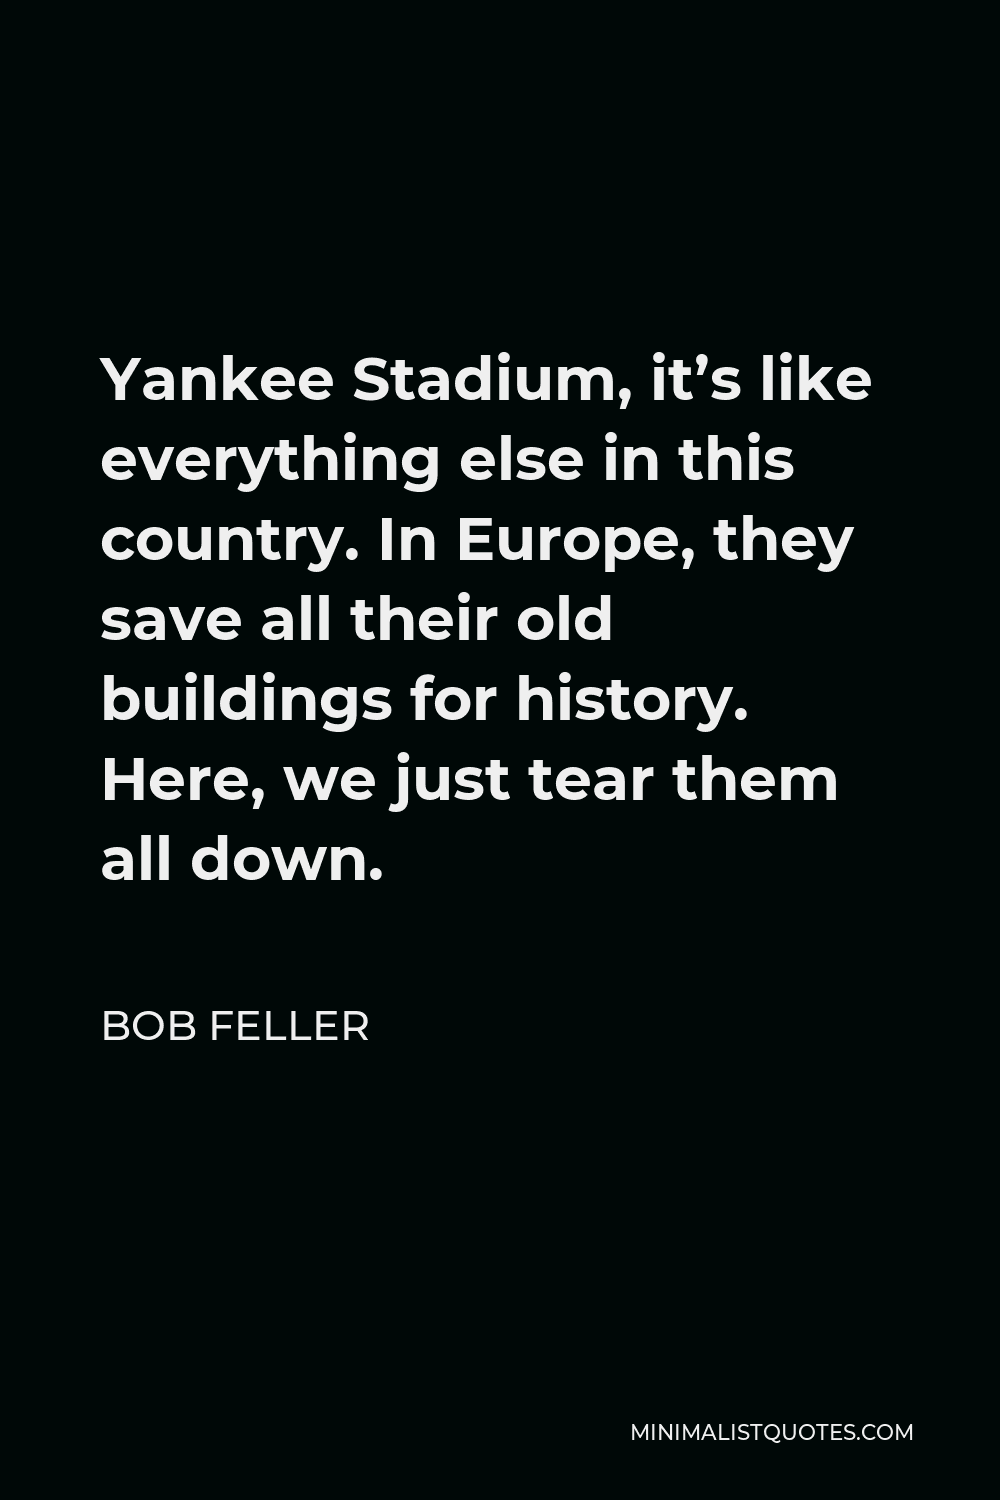 Bob Feller Quote - Yankee Stadium, it’s like everything else in this country. In Europe, they save all their old buildings for history. Here, we just tear them all down.